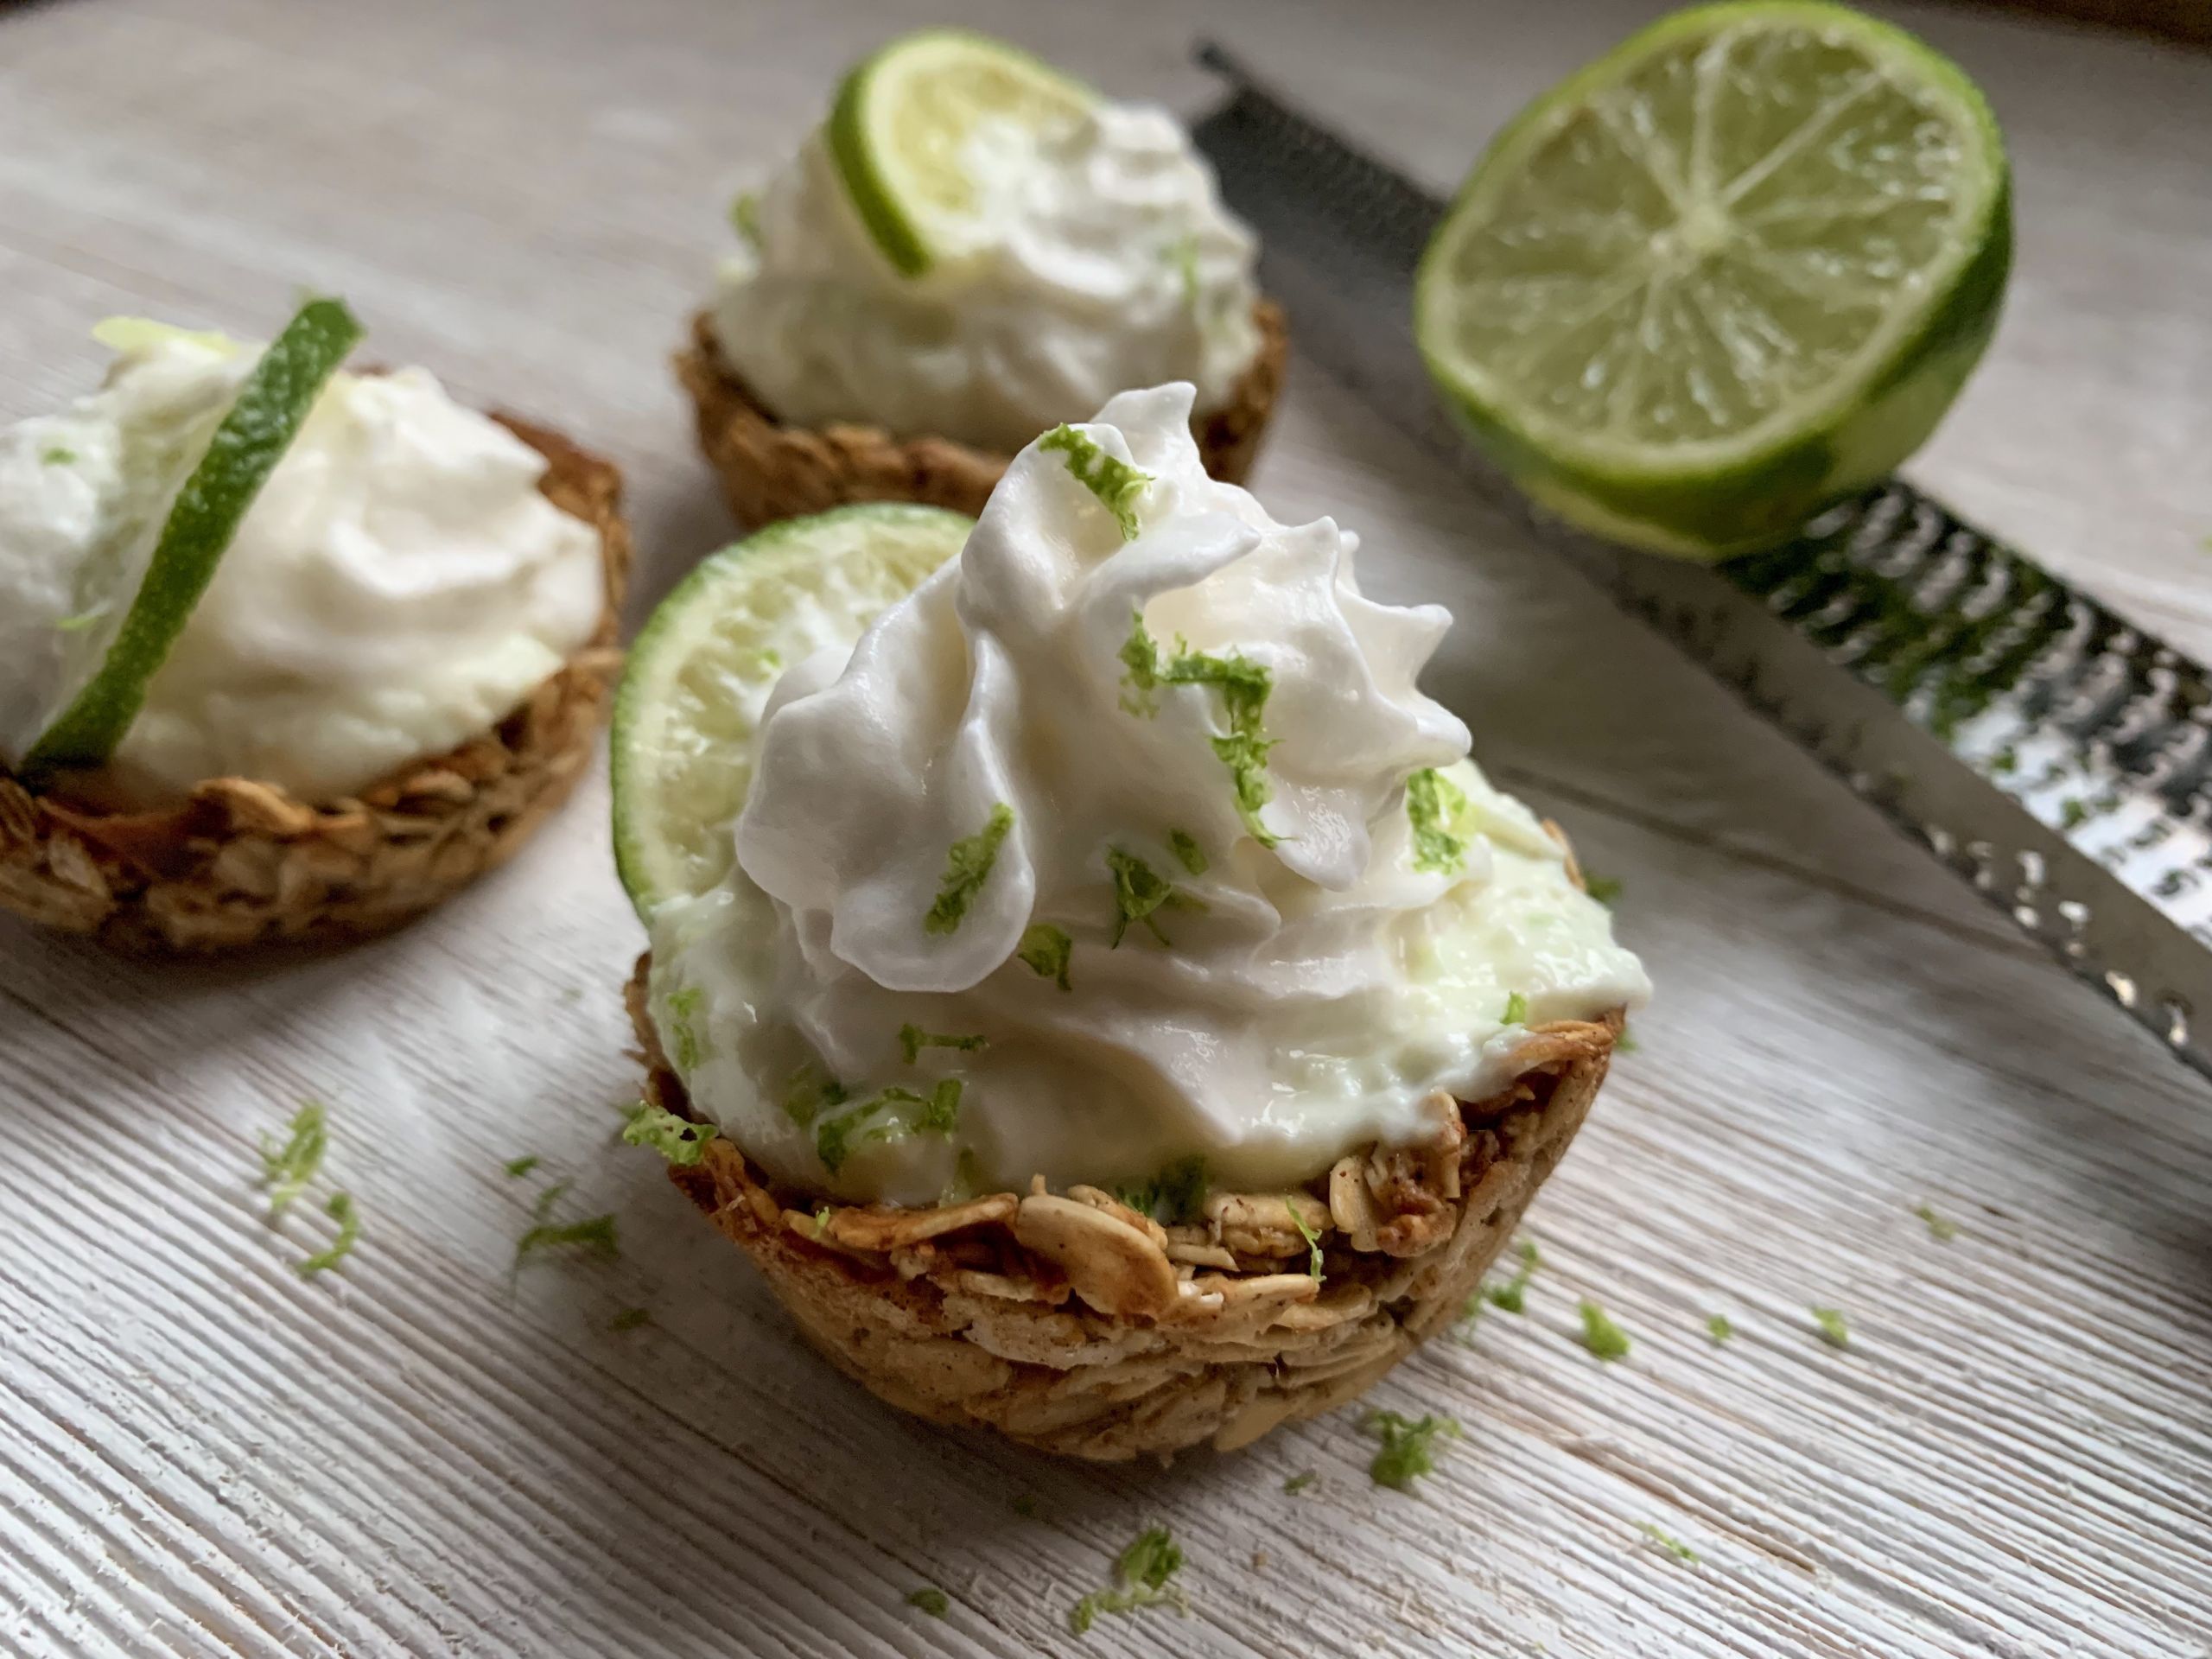 Weight Watcher Key Lime Pie Lovely Weight Watchers Key Lime Pie Recipe Easy